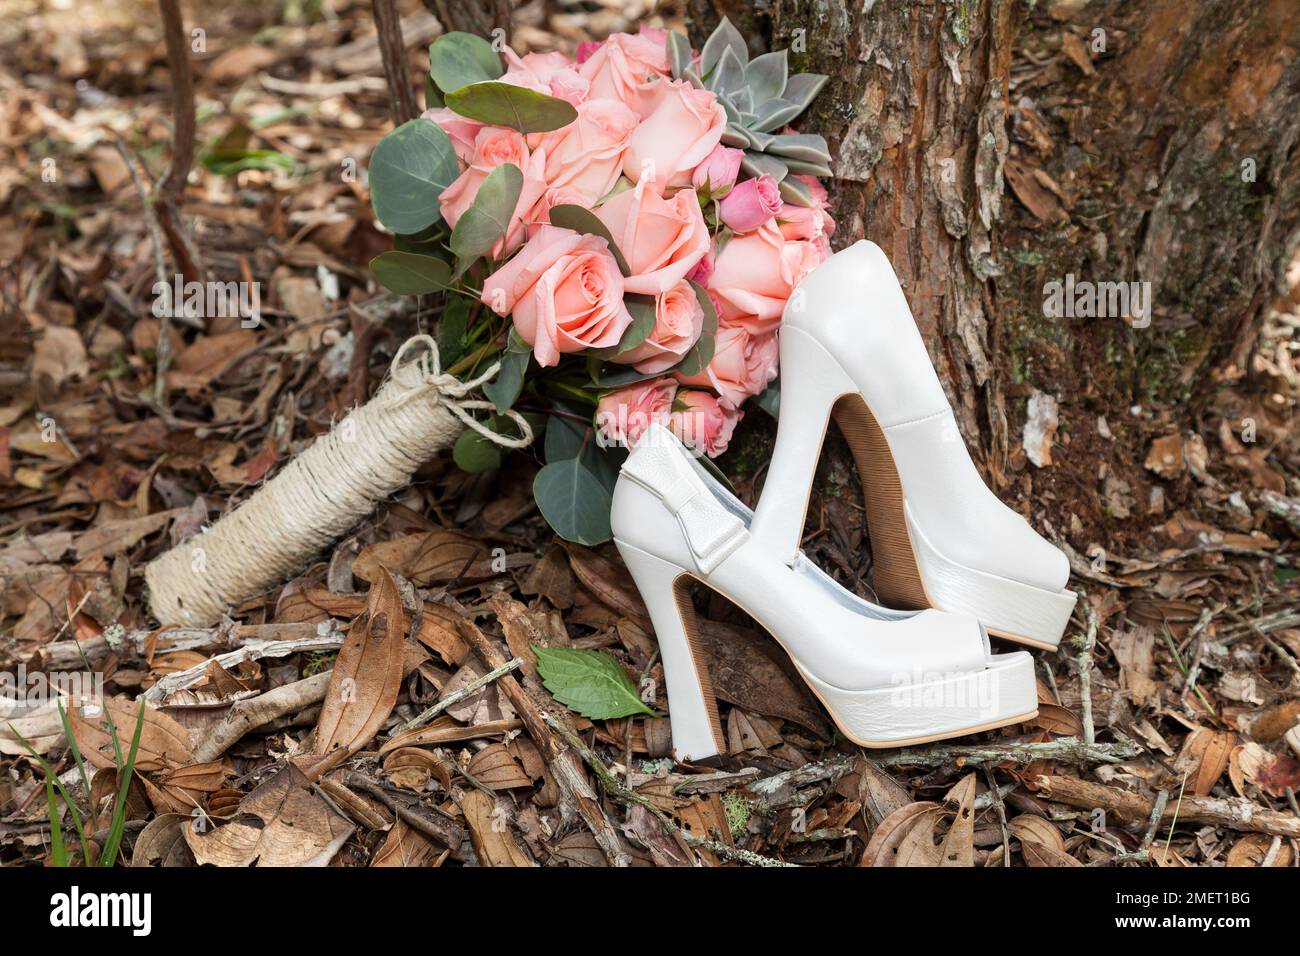 Shoes And Bouquet For The Bride On Wedding Day. Stock Photo